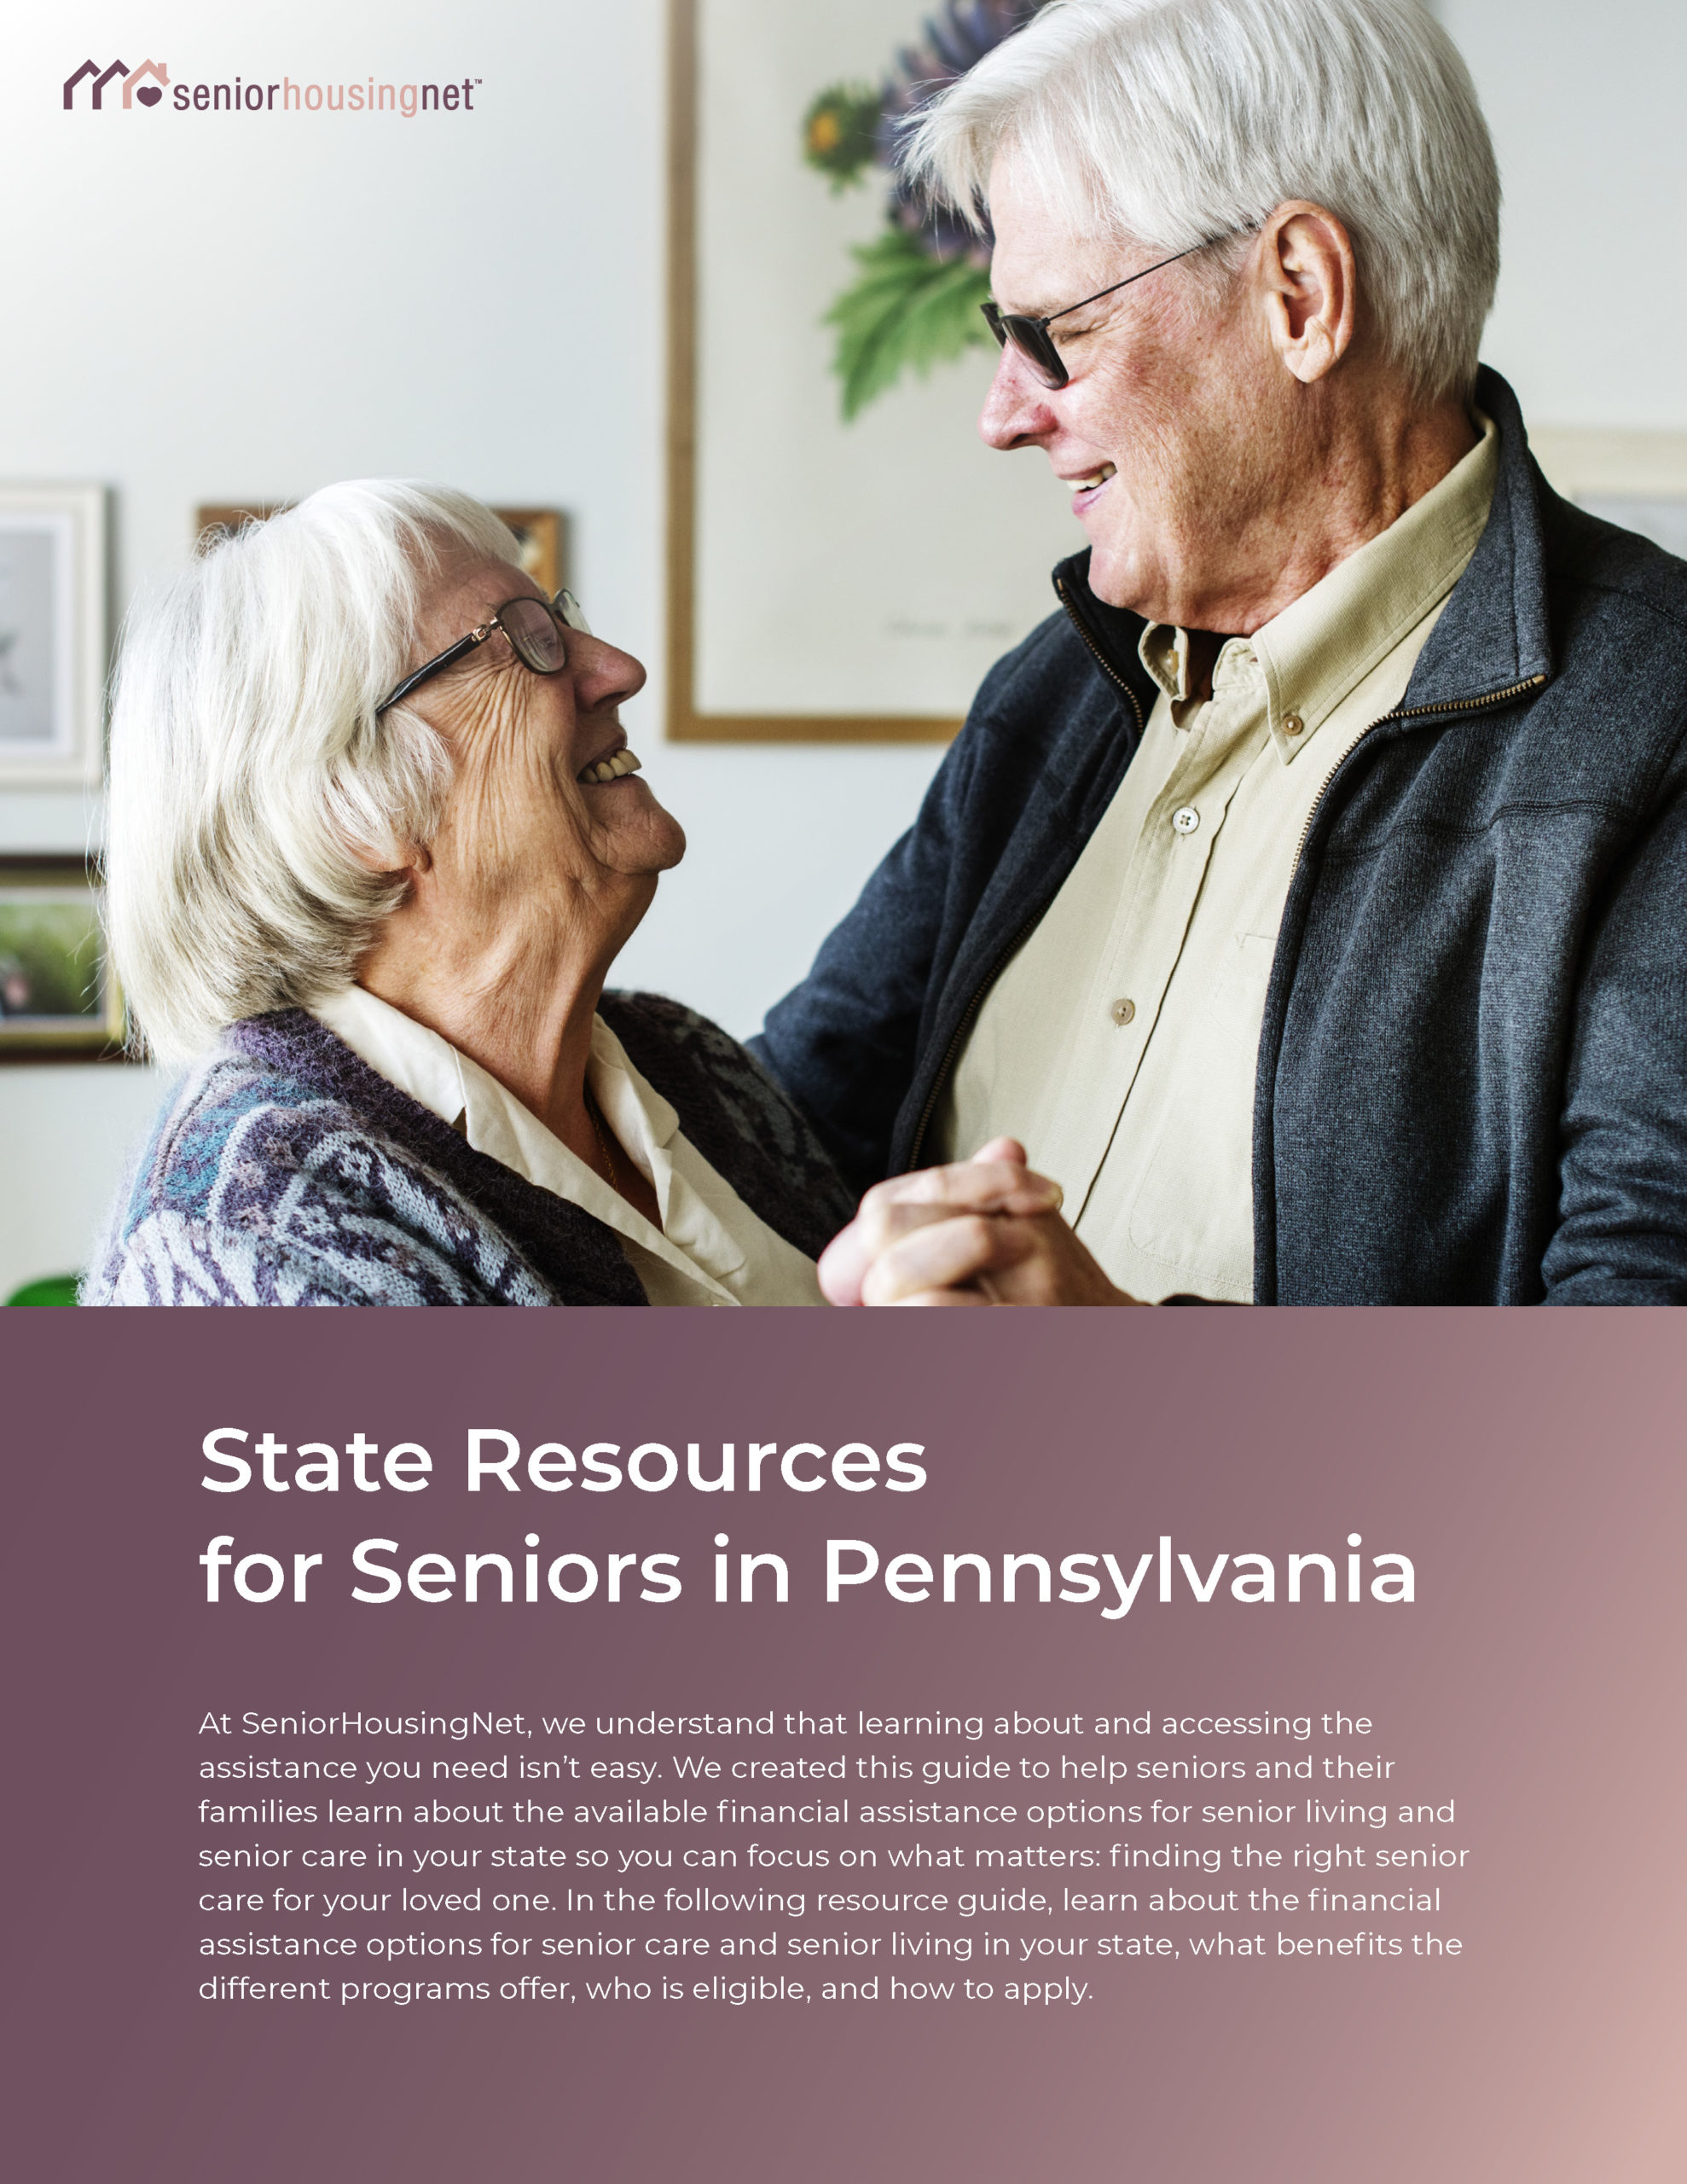 State Resources for Seniors in Pennsylvania